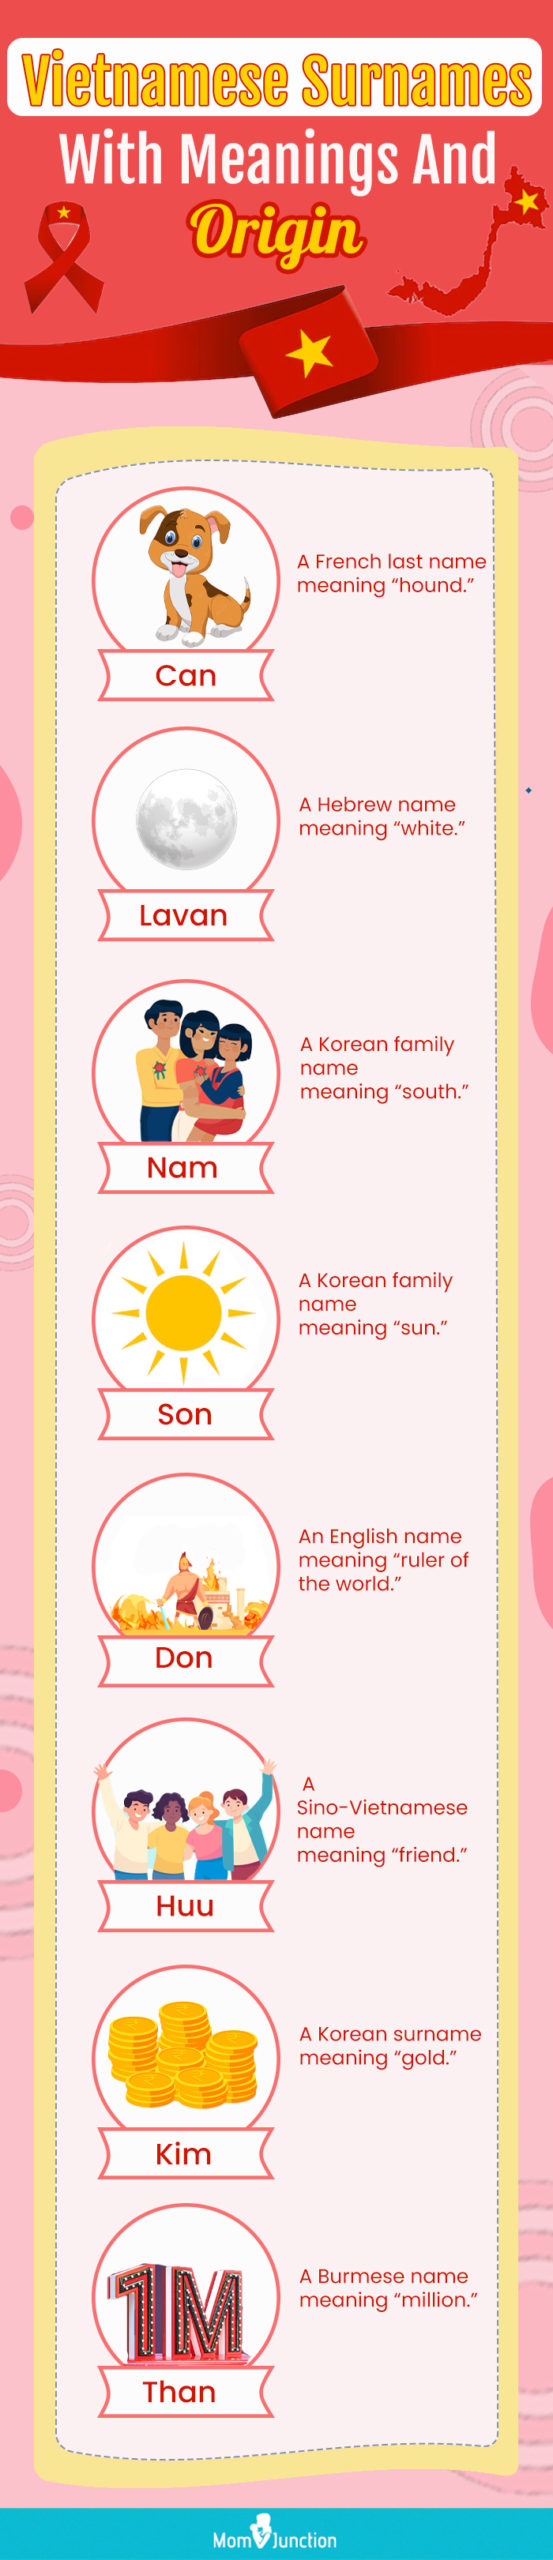 vietnamese surnames with meanings and origin [infographic]